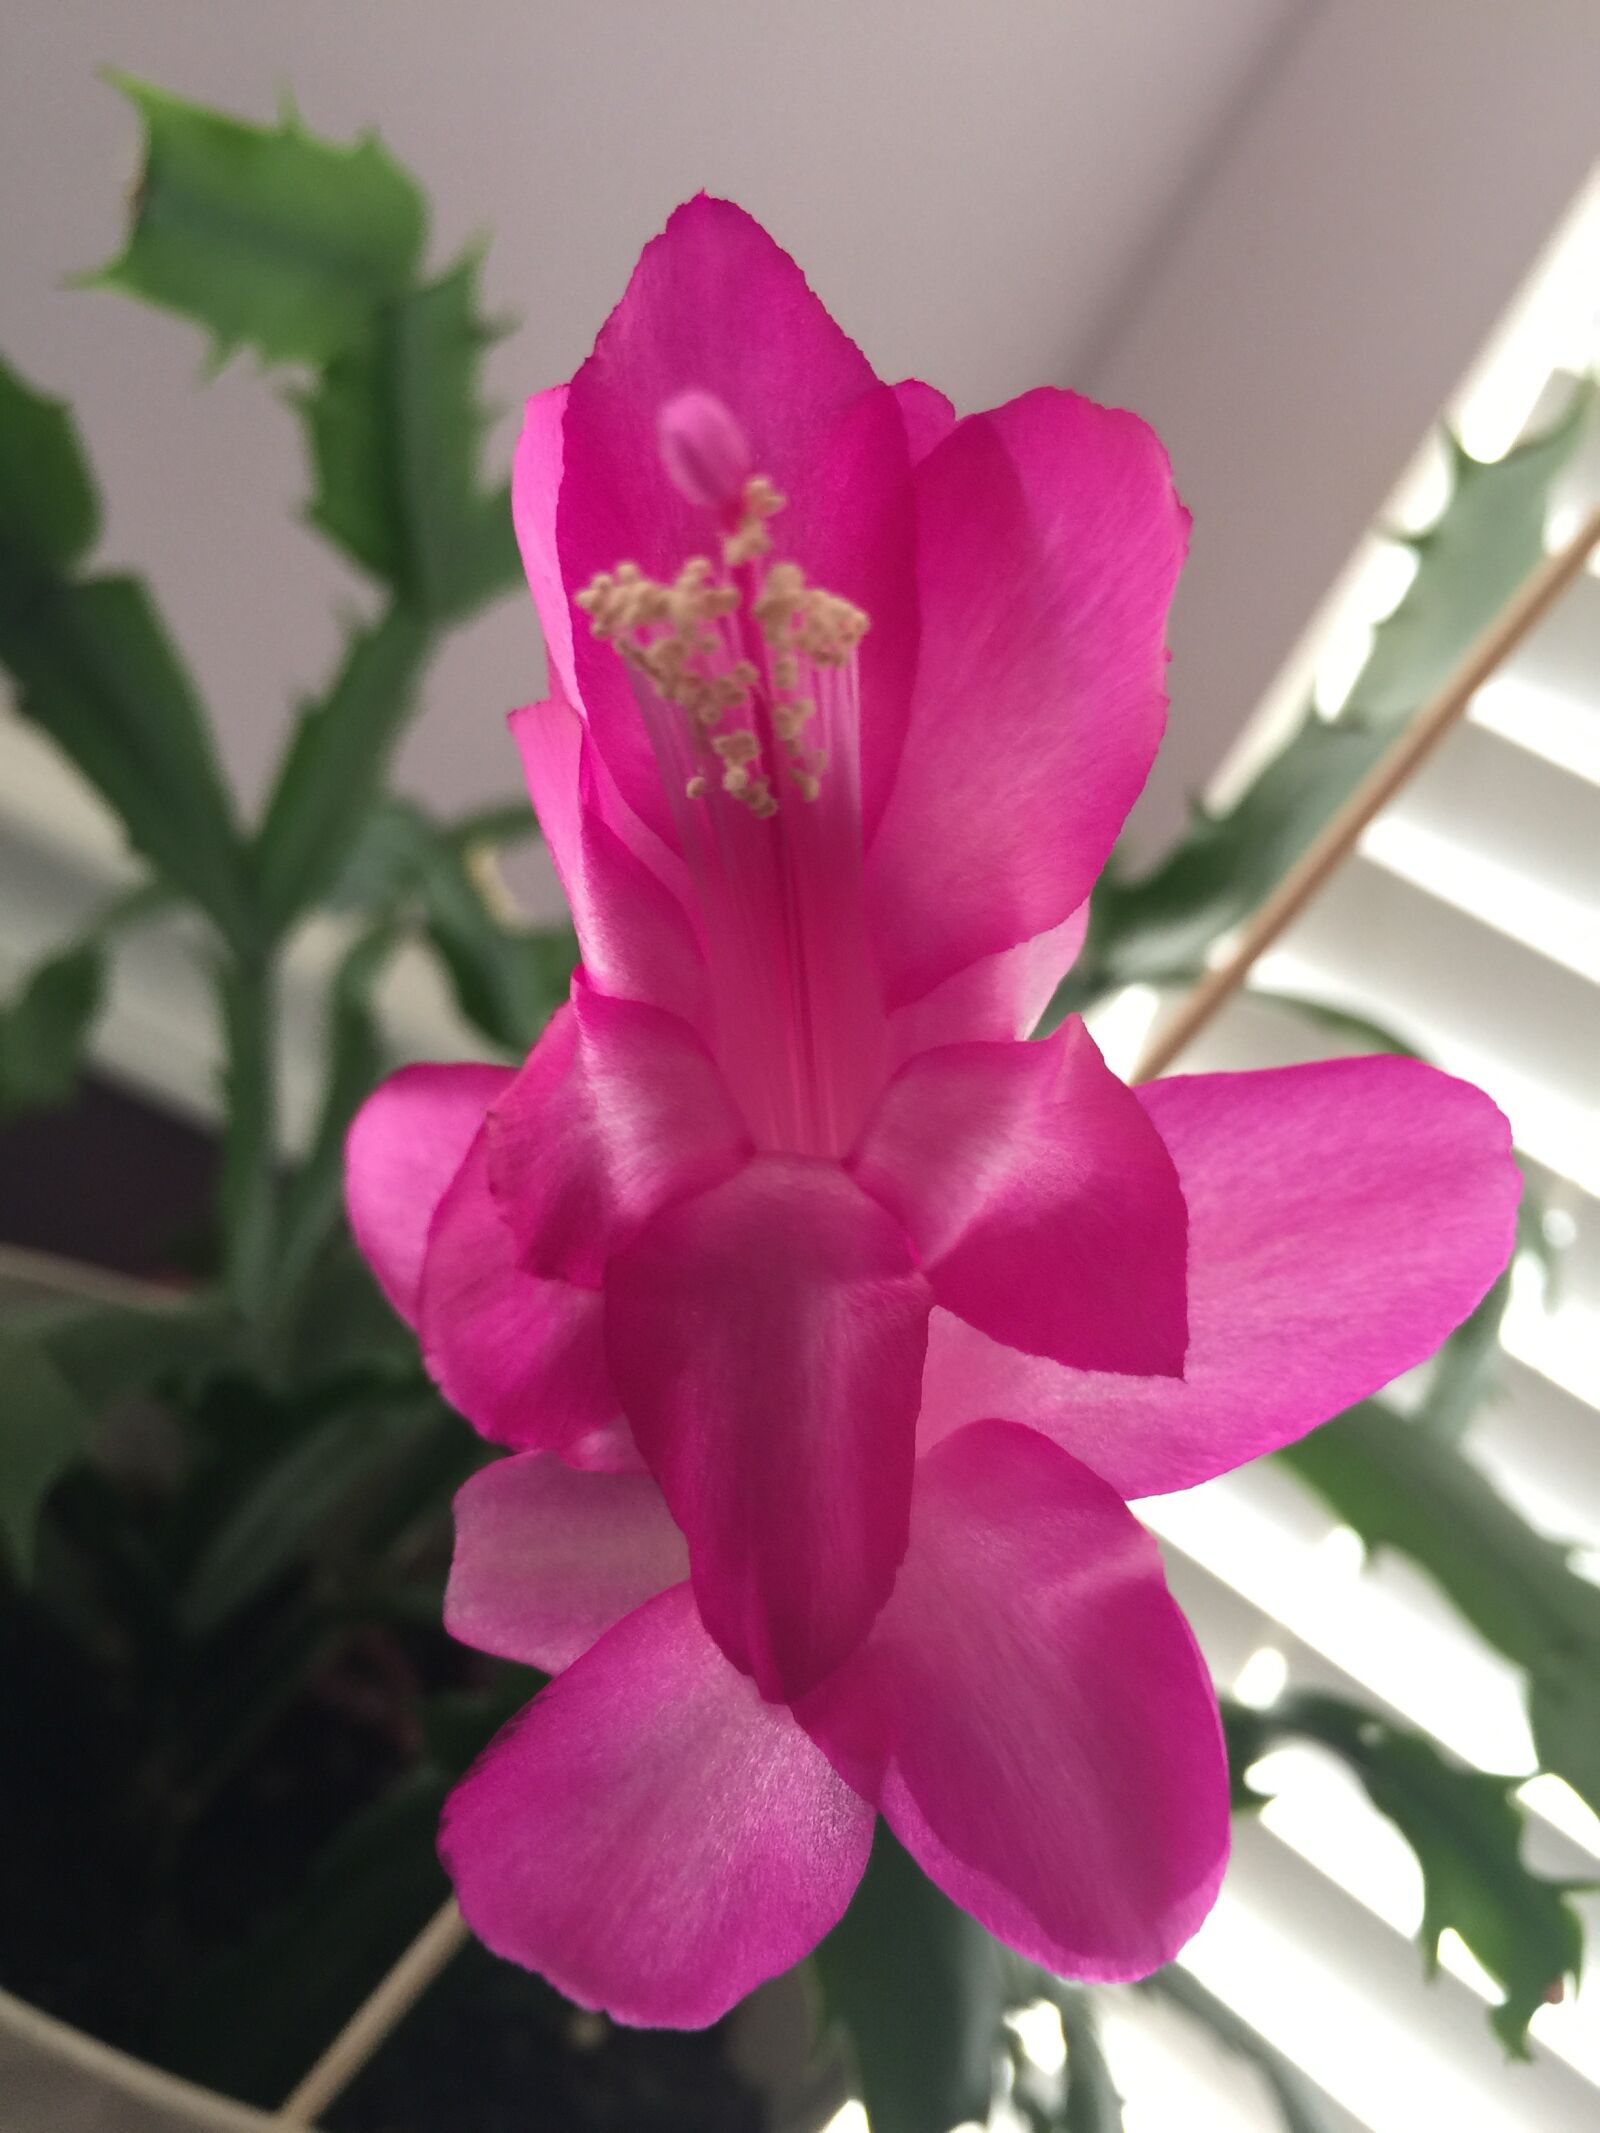 Apple iPhone 6 Plus sample photo. Christmas plant, pink, bloom photography